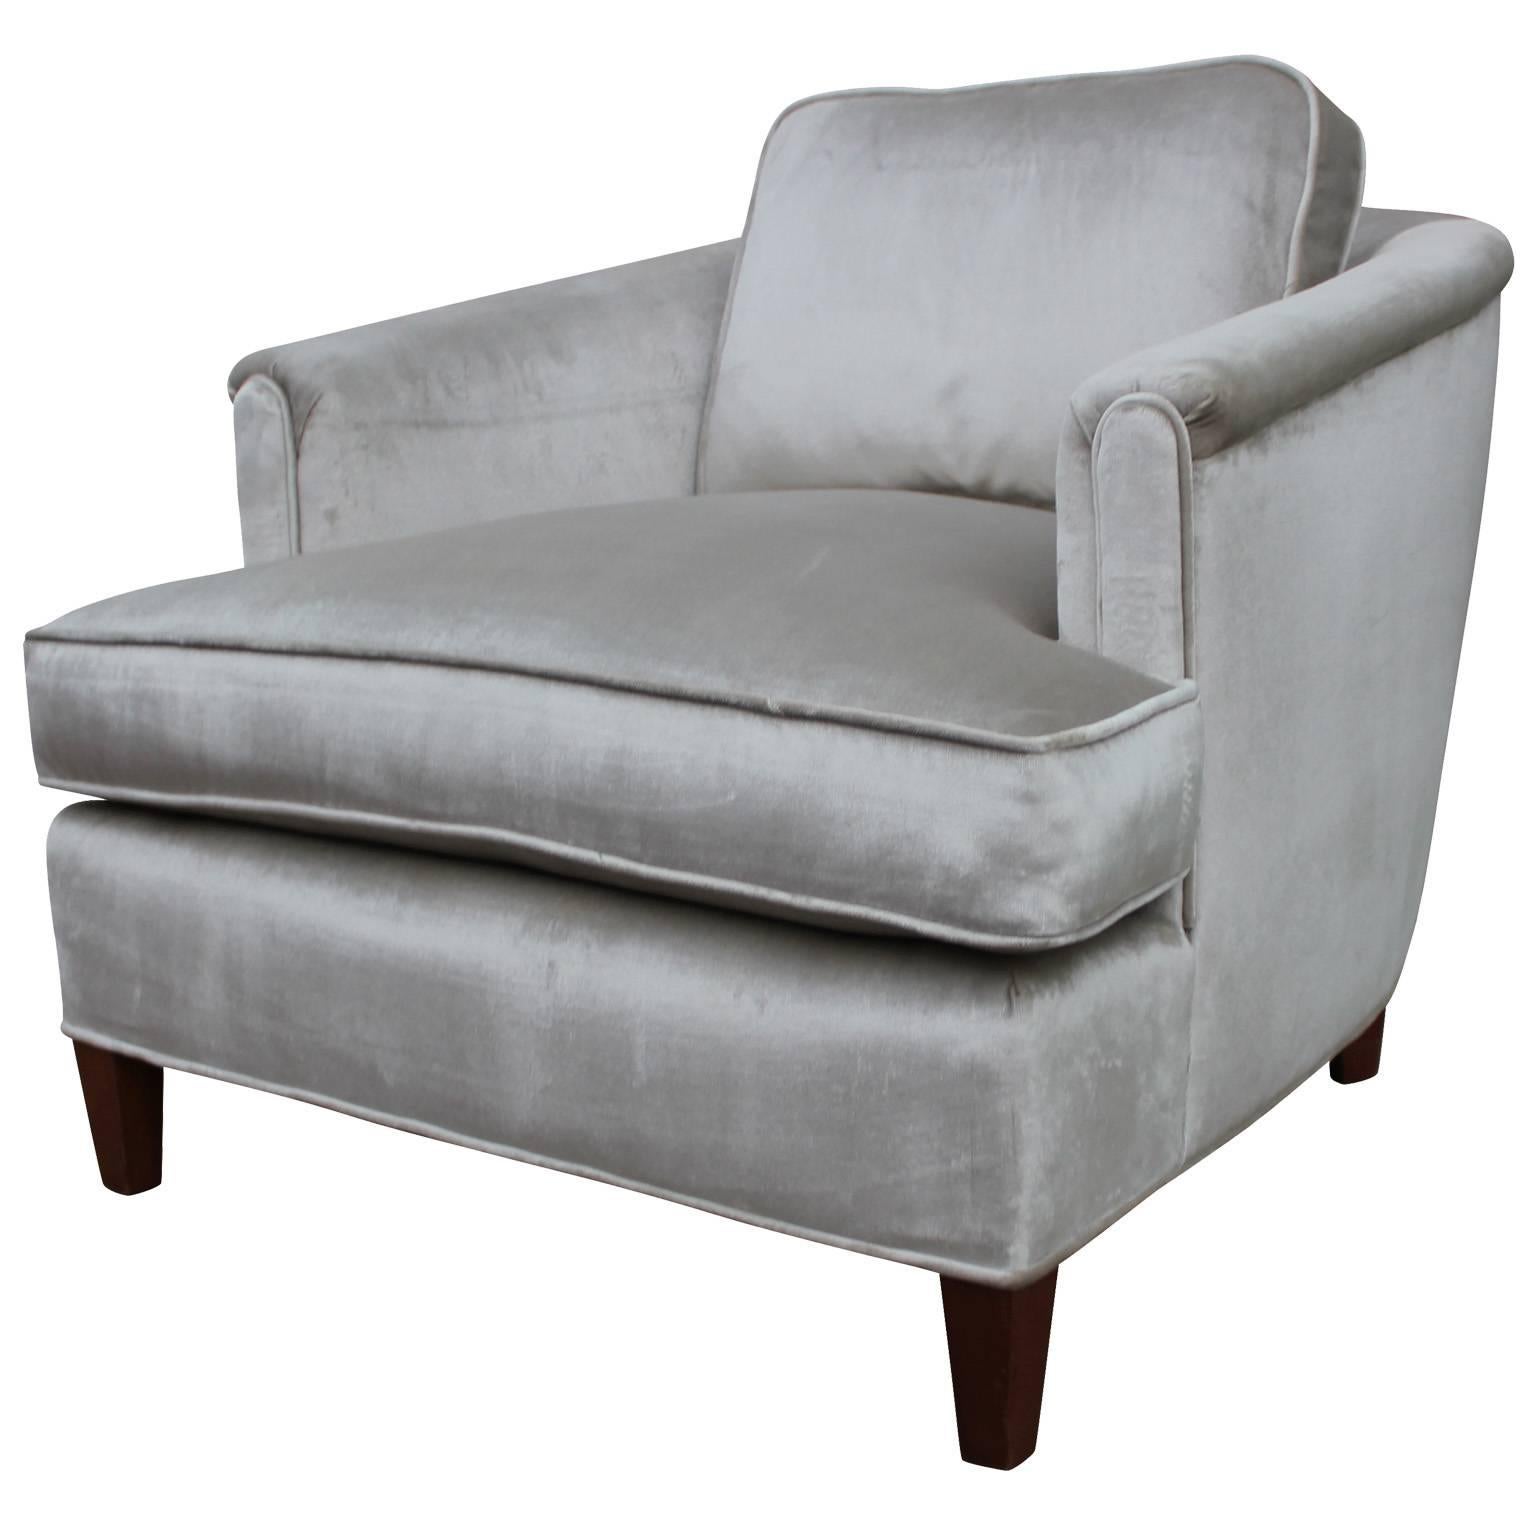 Pair of comfortable and elegant barrel back lounge chairs. Chairs are freshly upholstered in a luxe silver velvet. Gently tapered legs are finished in a dark walnut. Stunning from all angles.